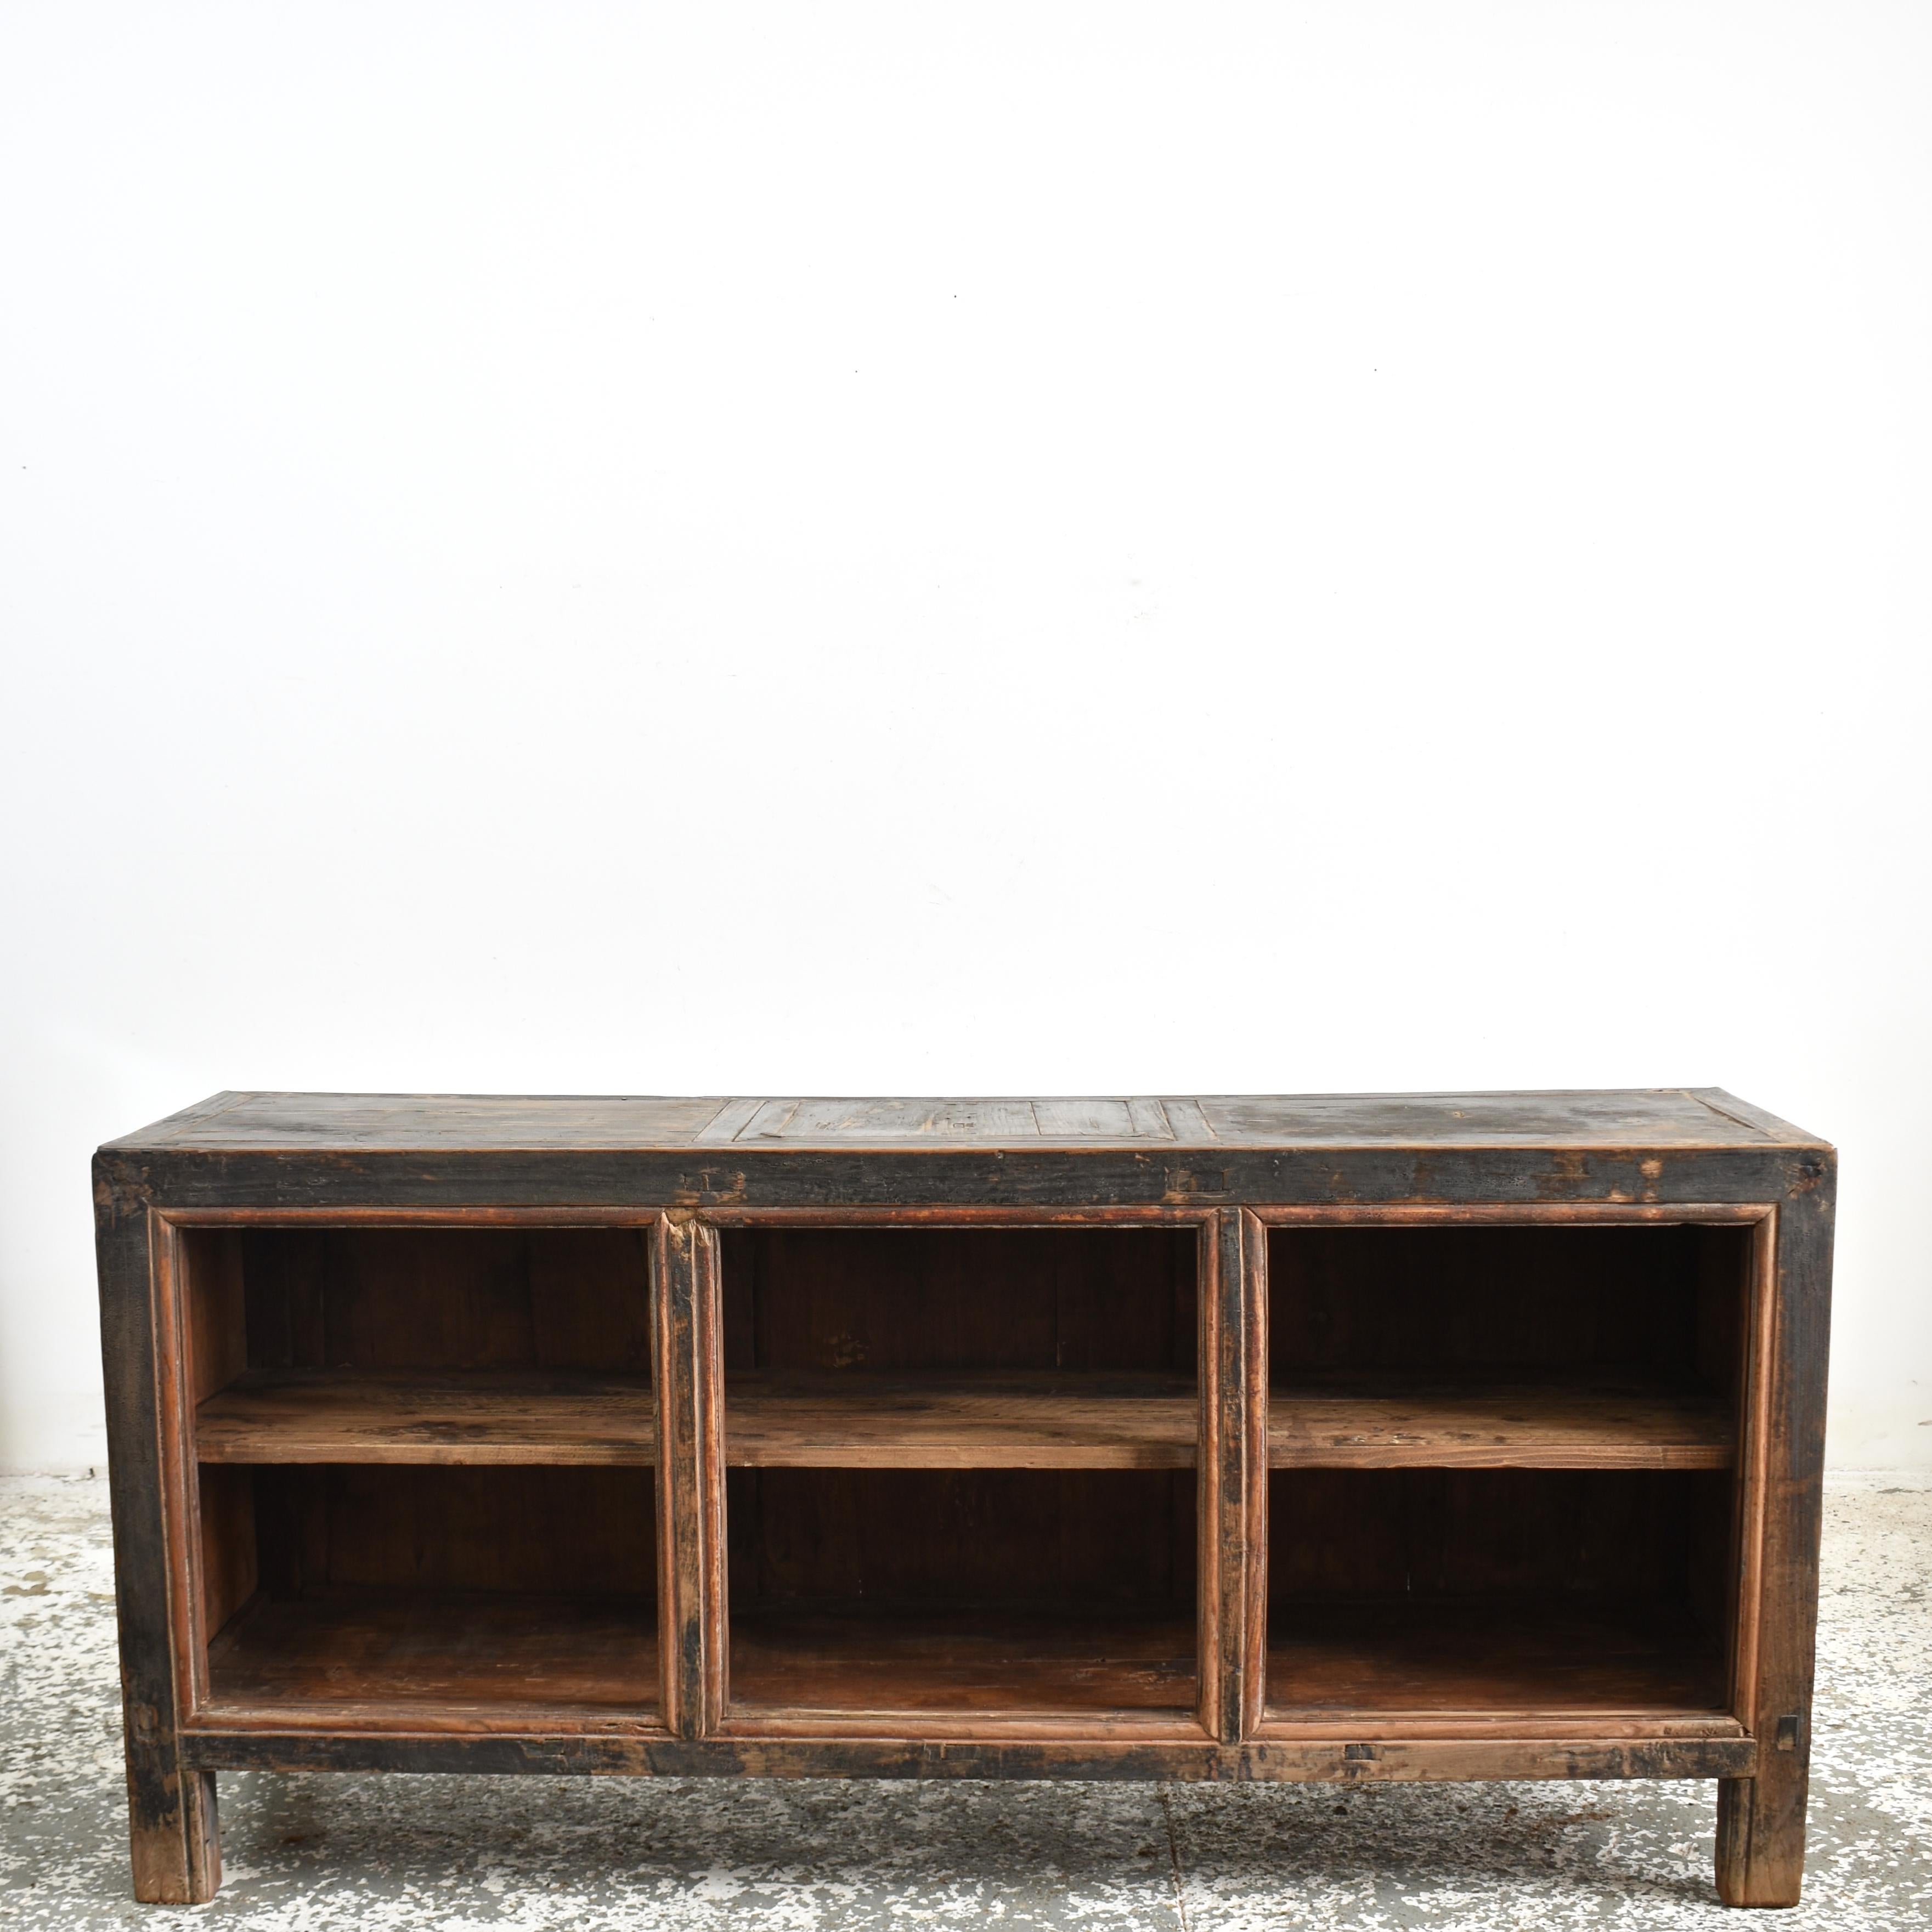 Antique Rustic Elm Haberdashery Kitchen Island Storage Sideboard – E

A lovely rustic open fronted storage shelving sideboard. The cabinet is constructed from elm wood with a pine panelled back. There is a central shelf which continues behind the 2